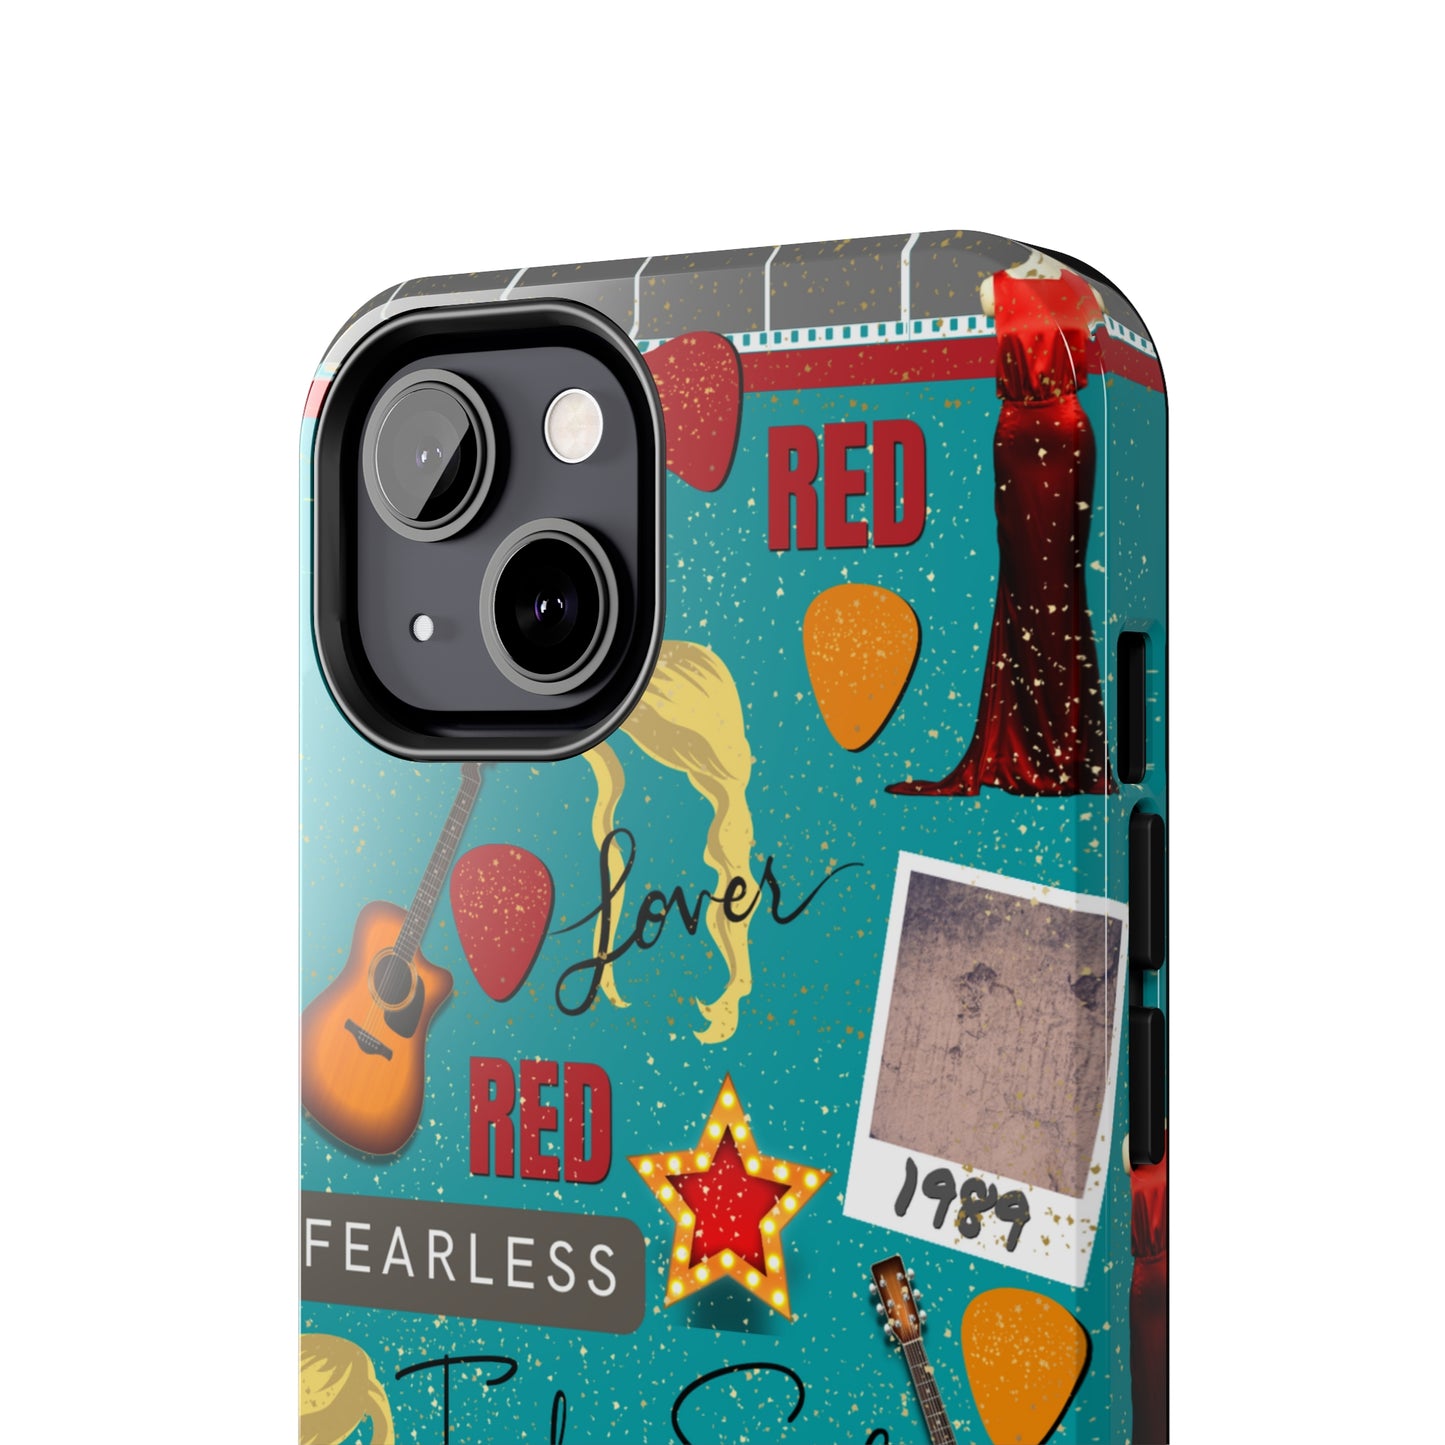 Swift iPhone Case, Fearless